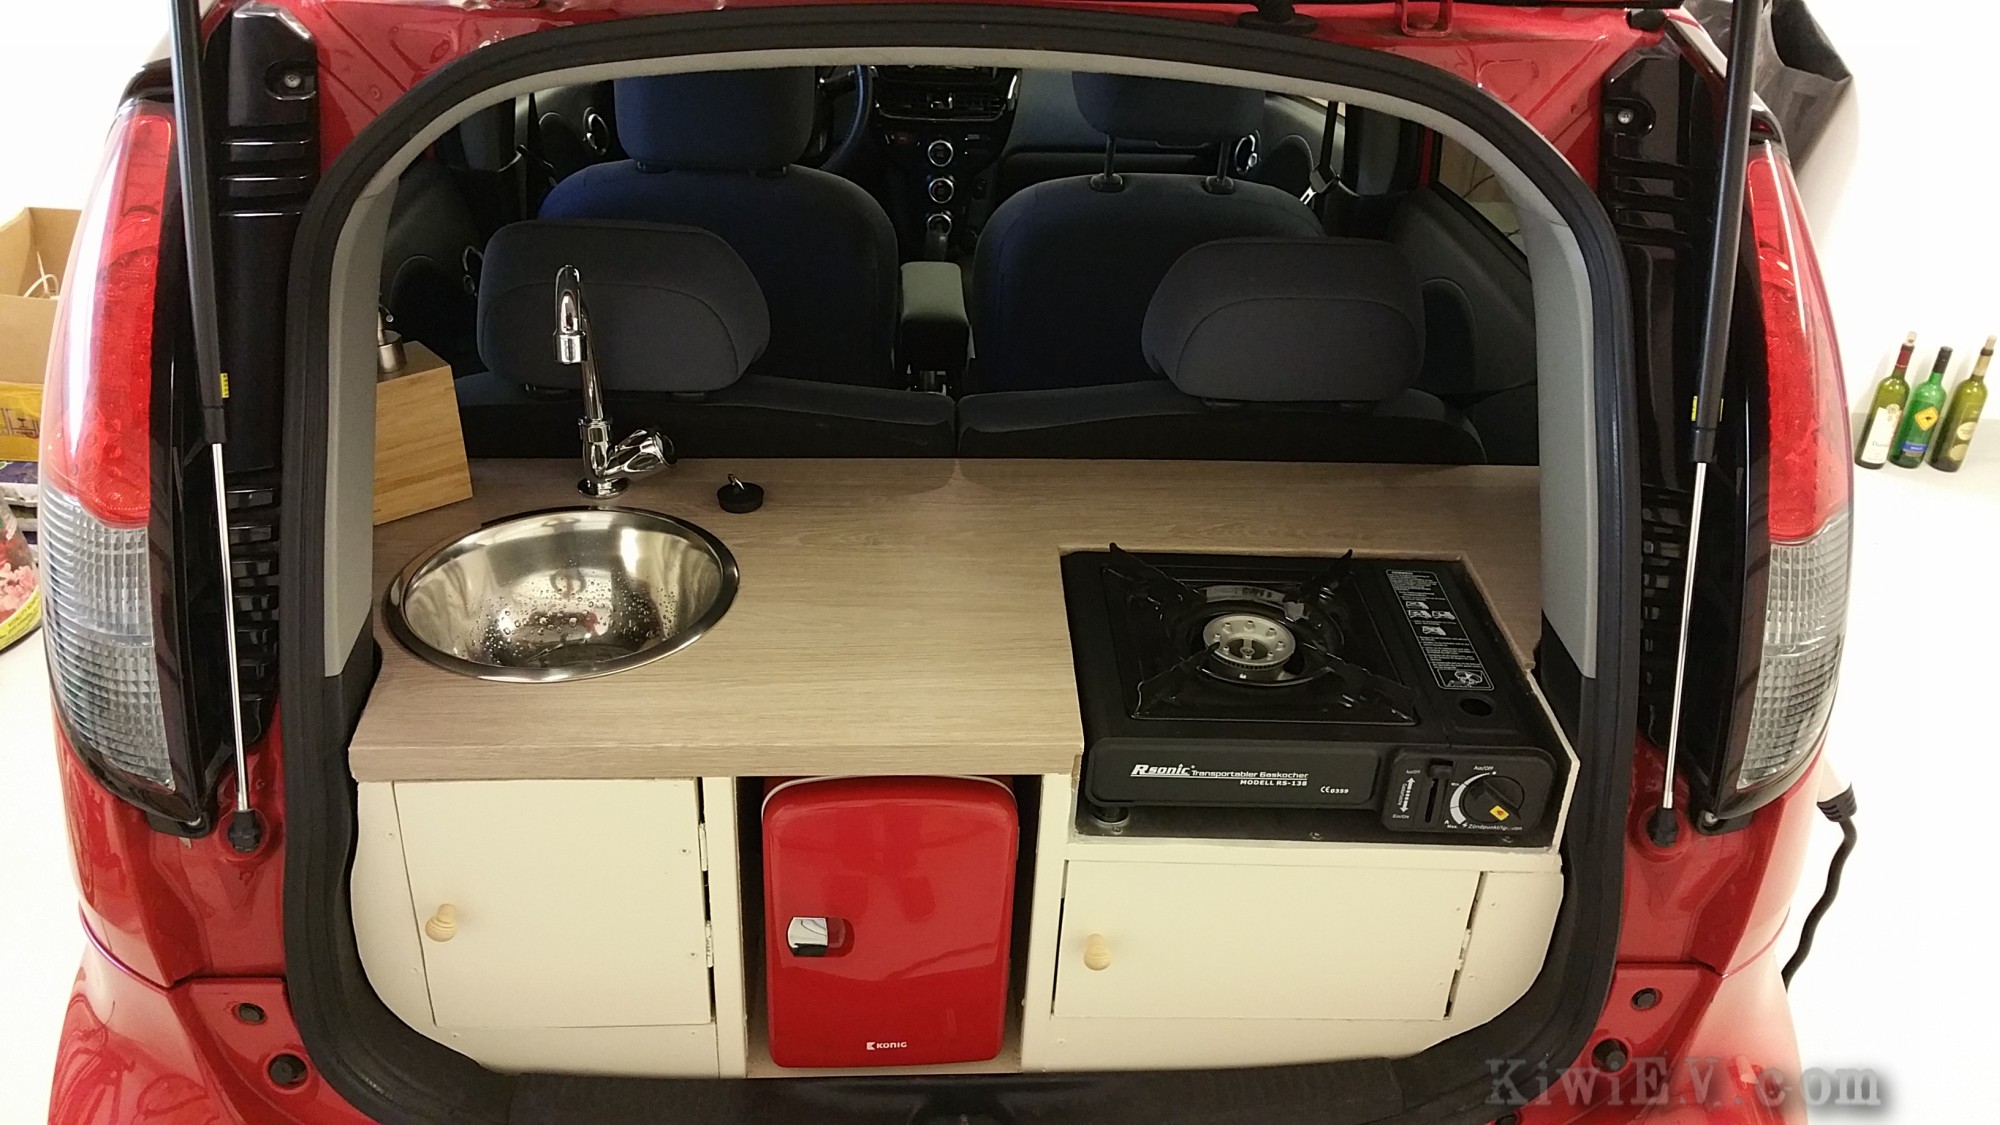 Installing a kitchen in my electric car